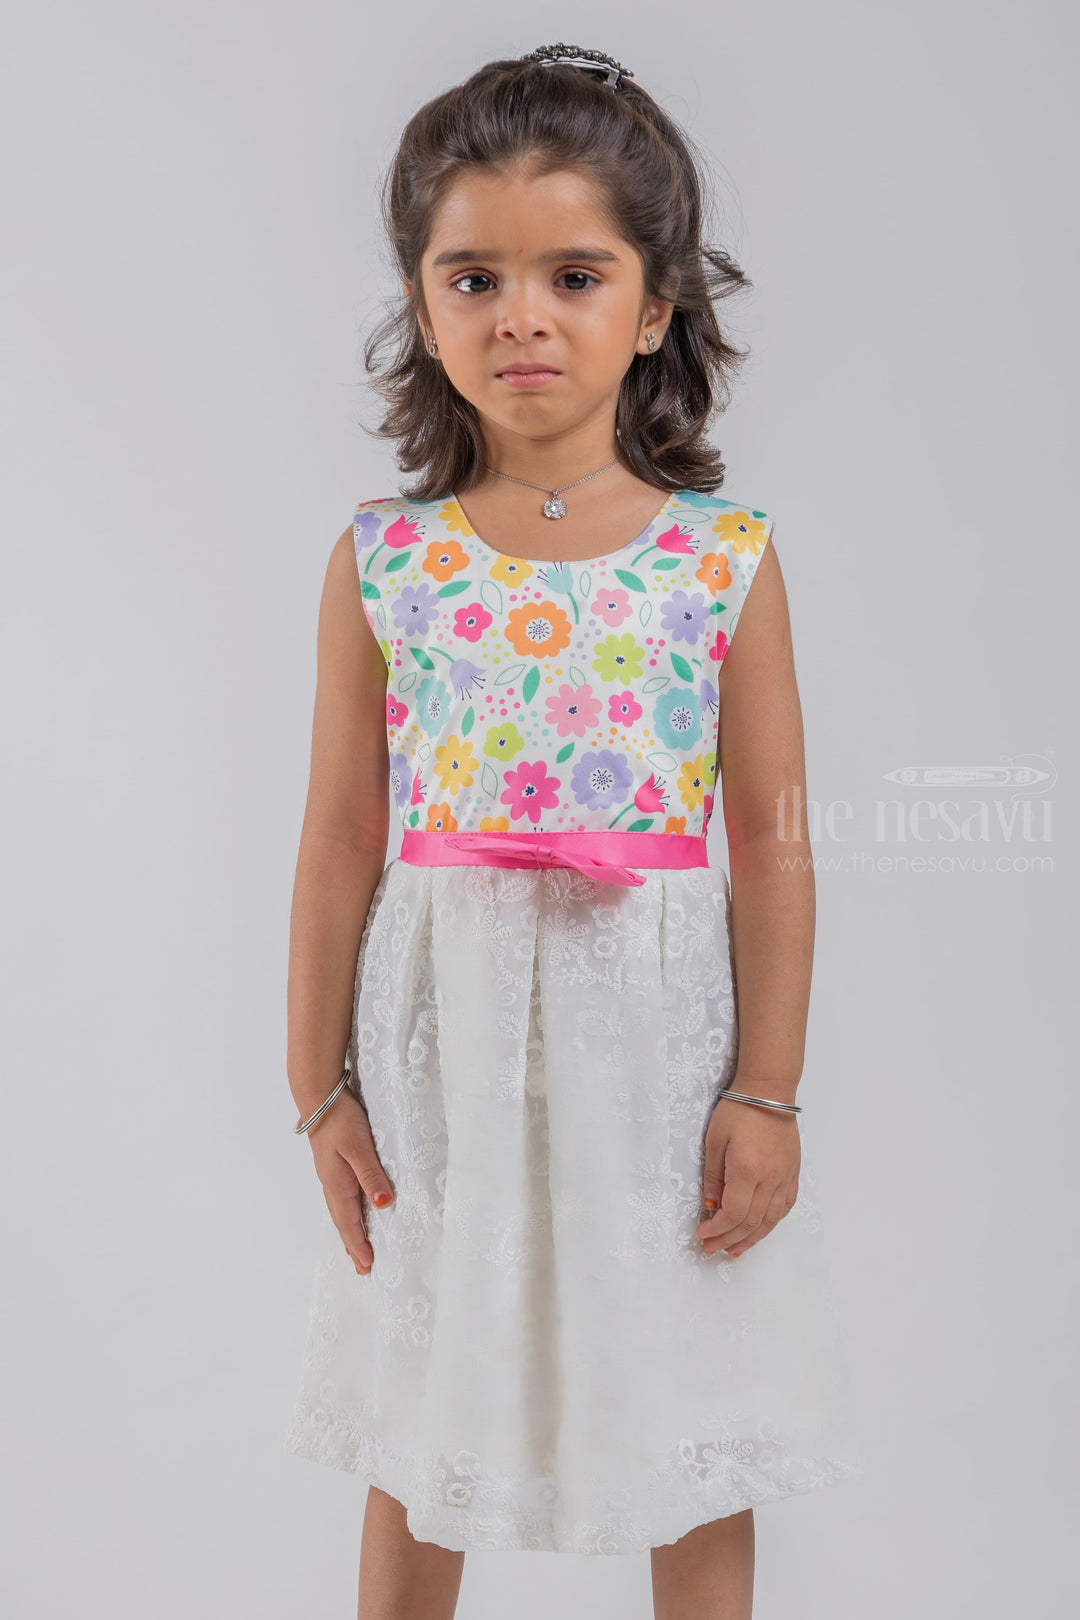 The Nesavu Baby Fancy Frock Floral Printed White Yoke with Floral Designer Lucknow Chikan Baby Frock psr silks Nesavu